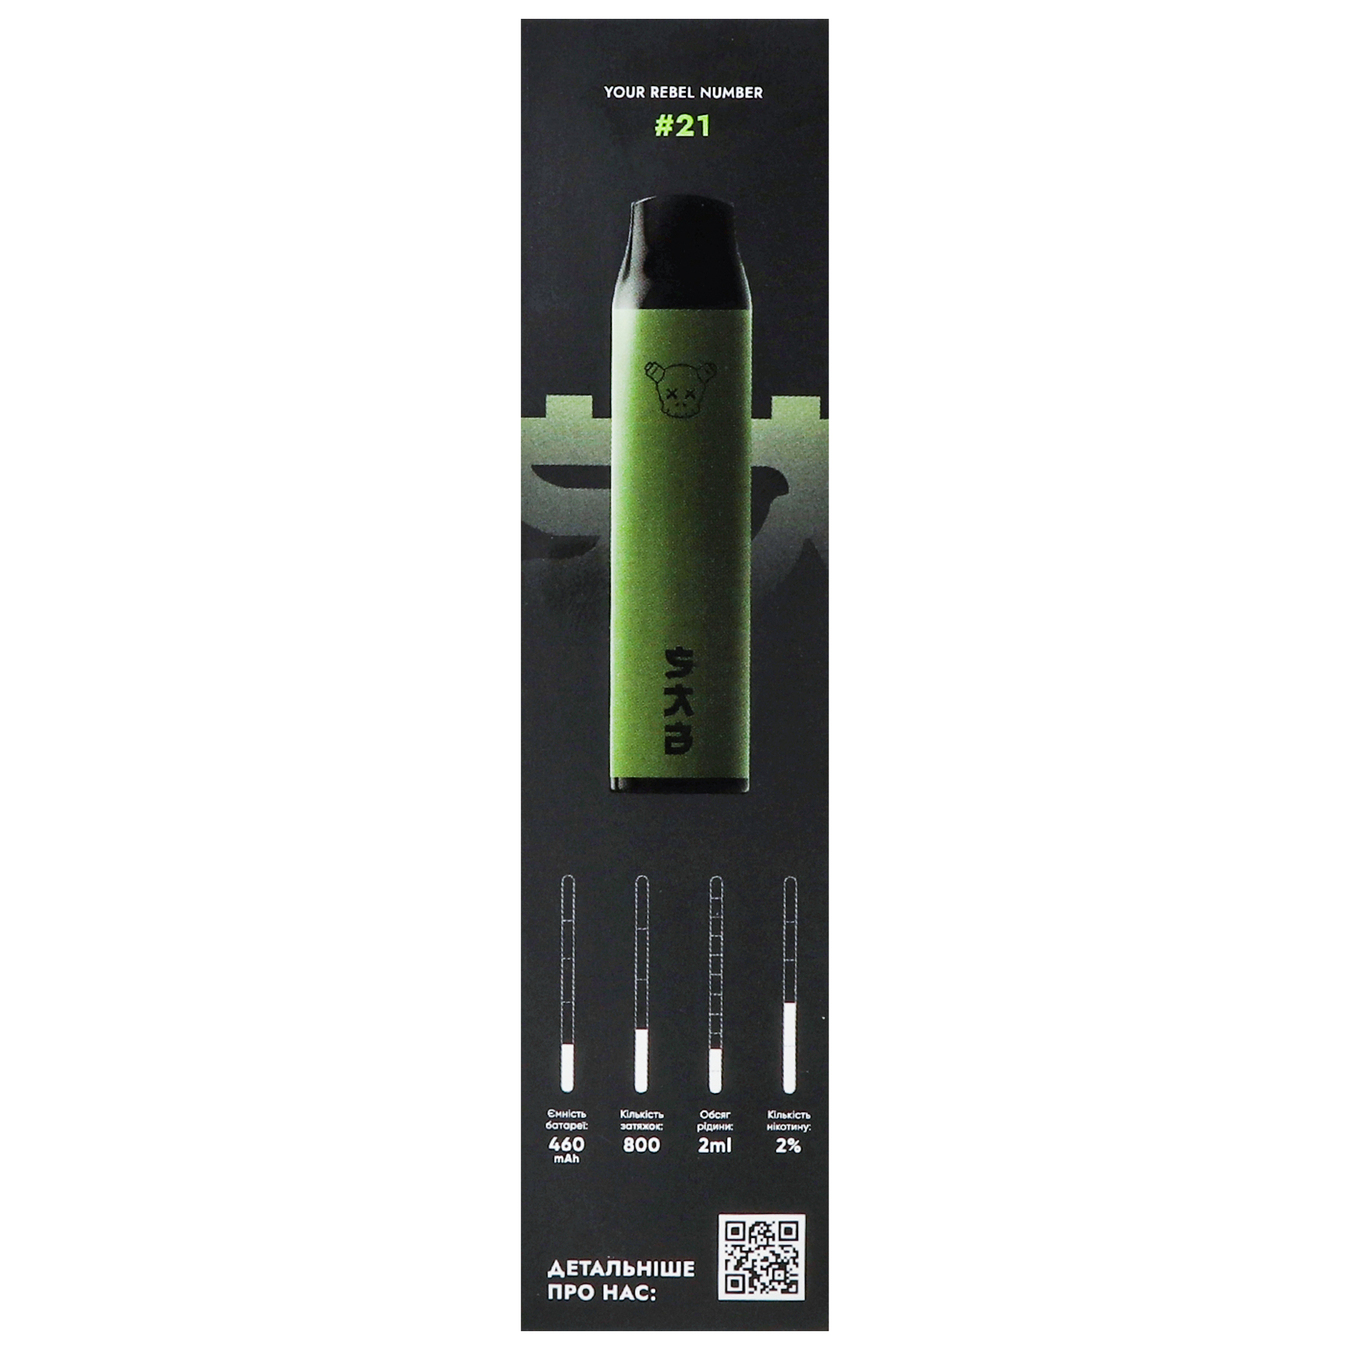 Vaporizer SAB 800 No. 21 green apple 2% 2ml (the price is without excise tax) 3